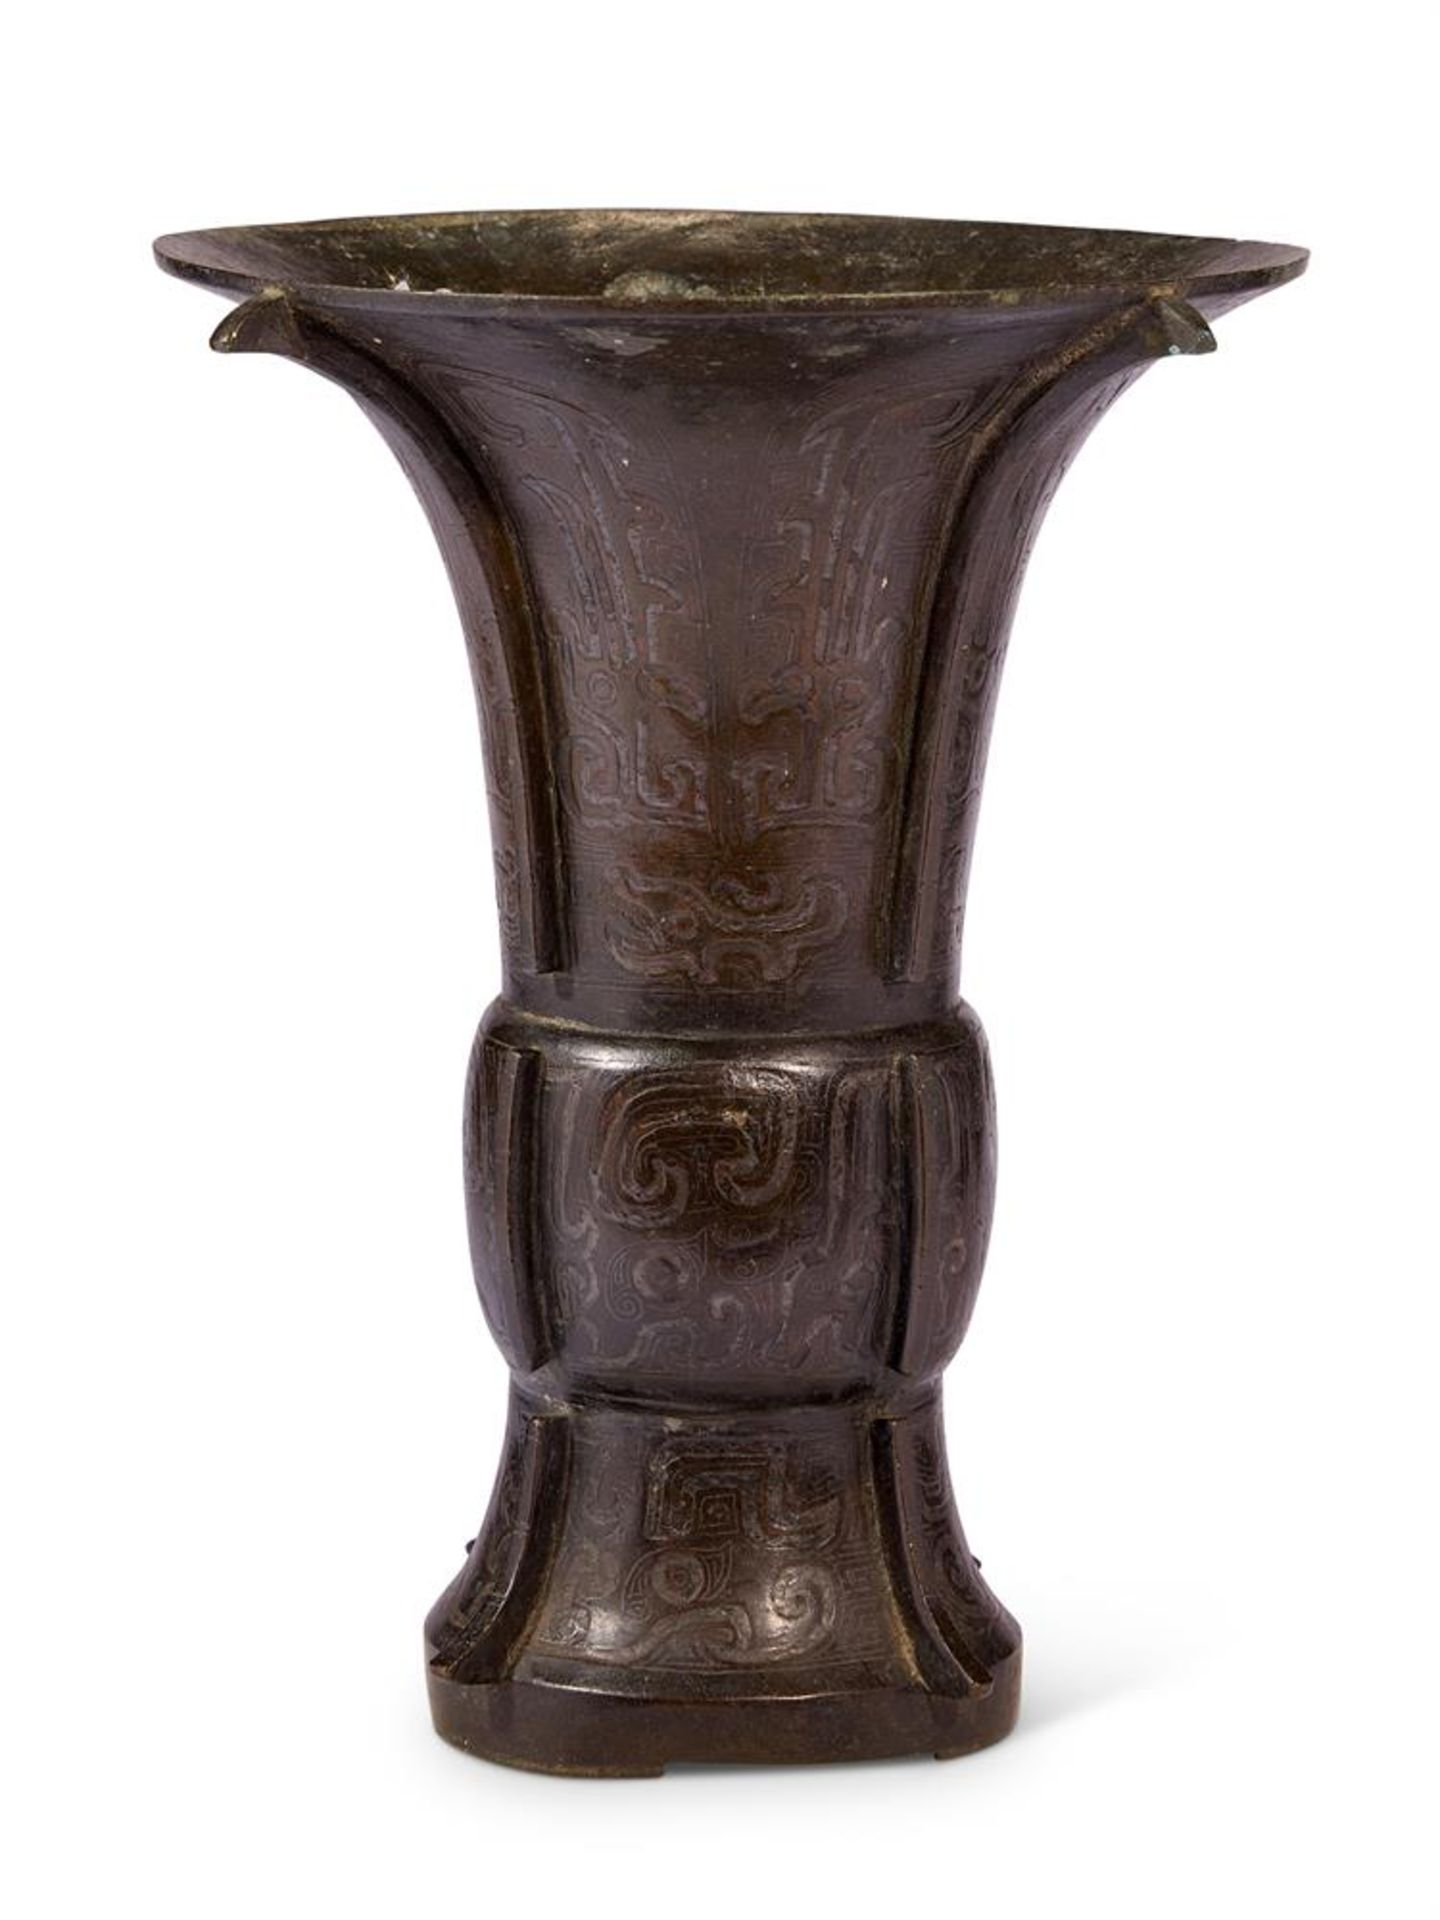 A CHINESE BRONZE SILVER-INLAID 'ARCHAISTIC' GU VASE, 17TH OR 18TH CENTURY